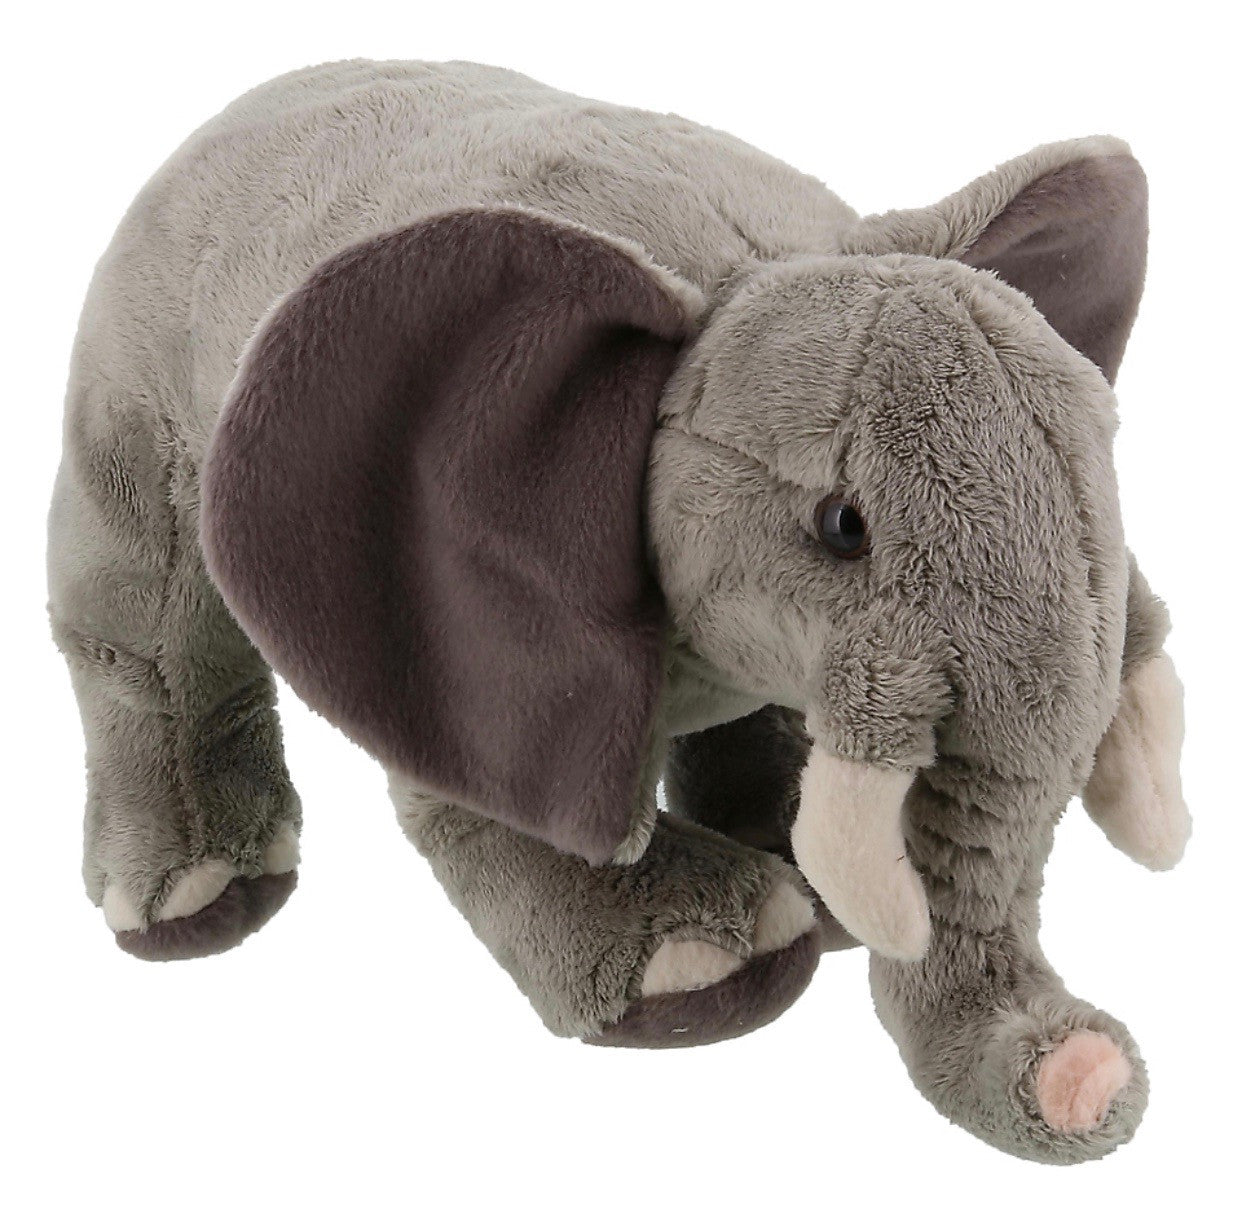 Disney Conservation Elephant Plush New with Tags